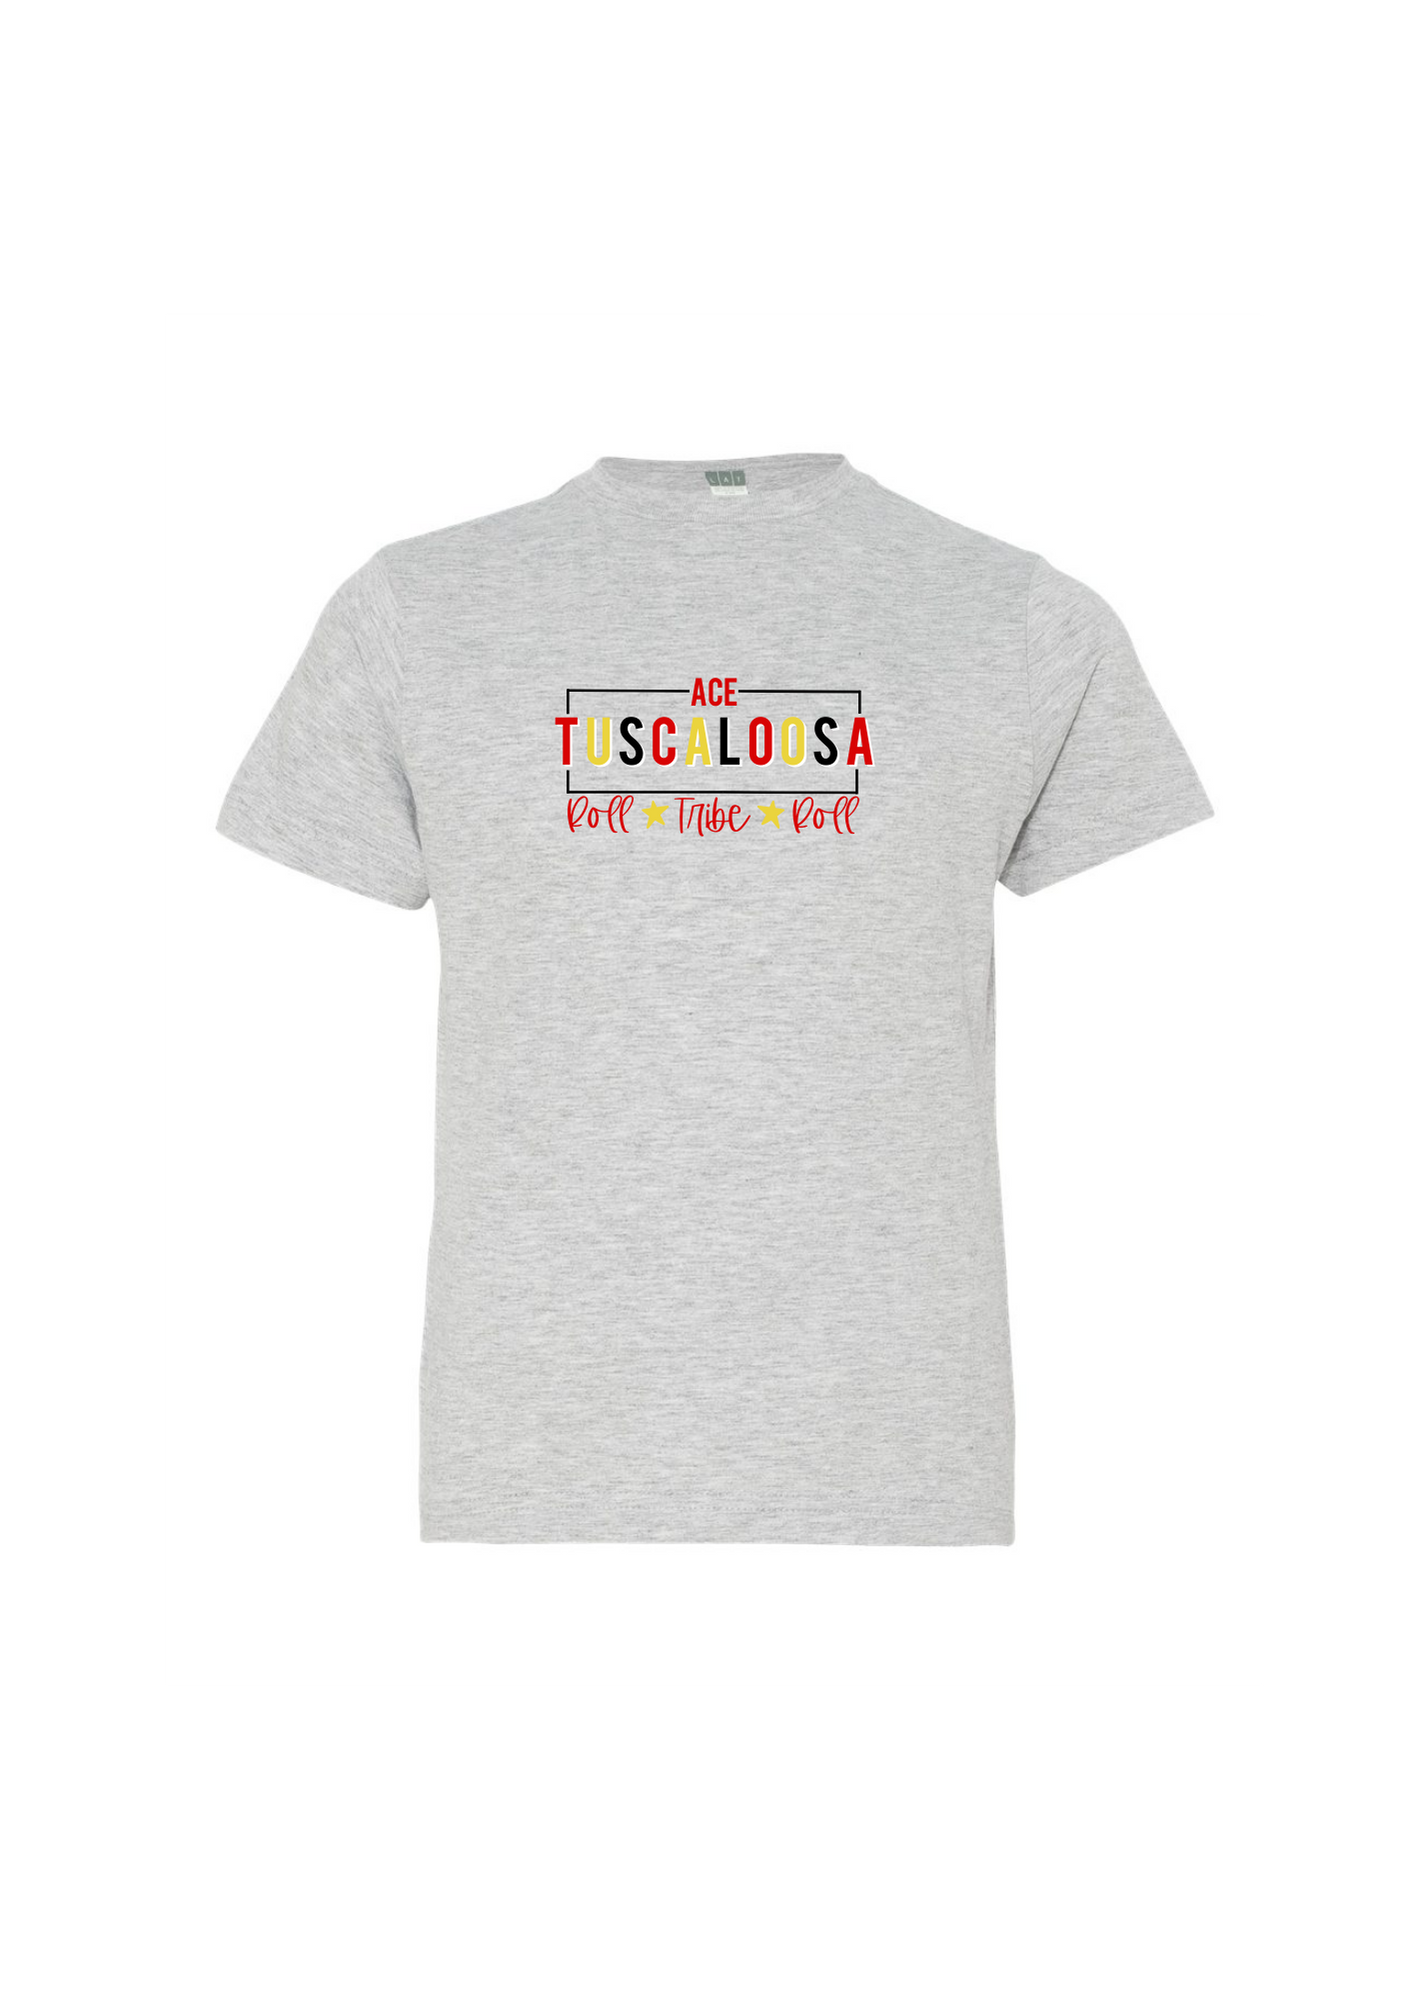 ACE Tuscaloosa | Tee | Kids-Sister Shirts-Sister Shirts, Cute & Custom Tees for Mama & Littles in Trussville, Alabama.